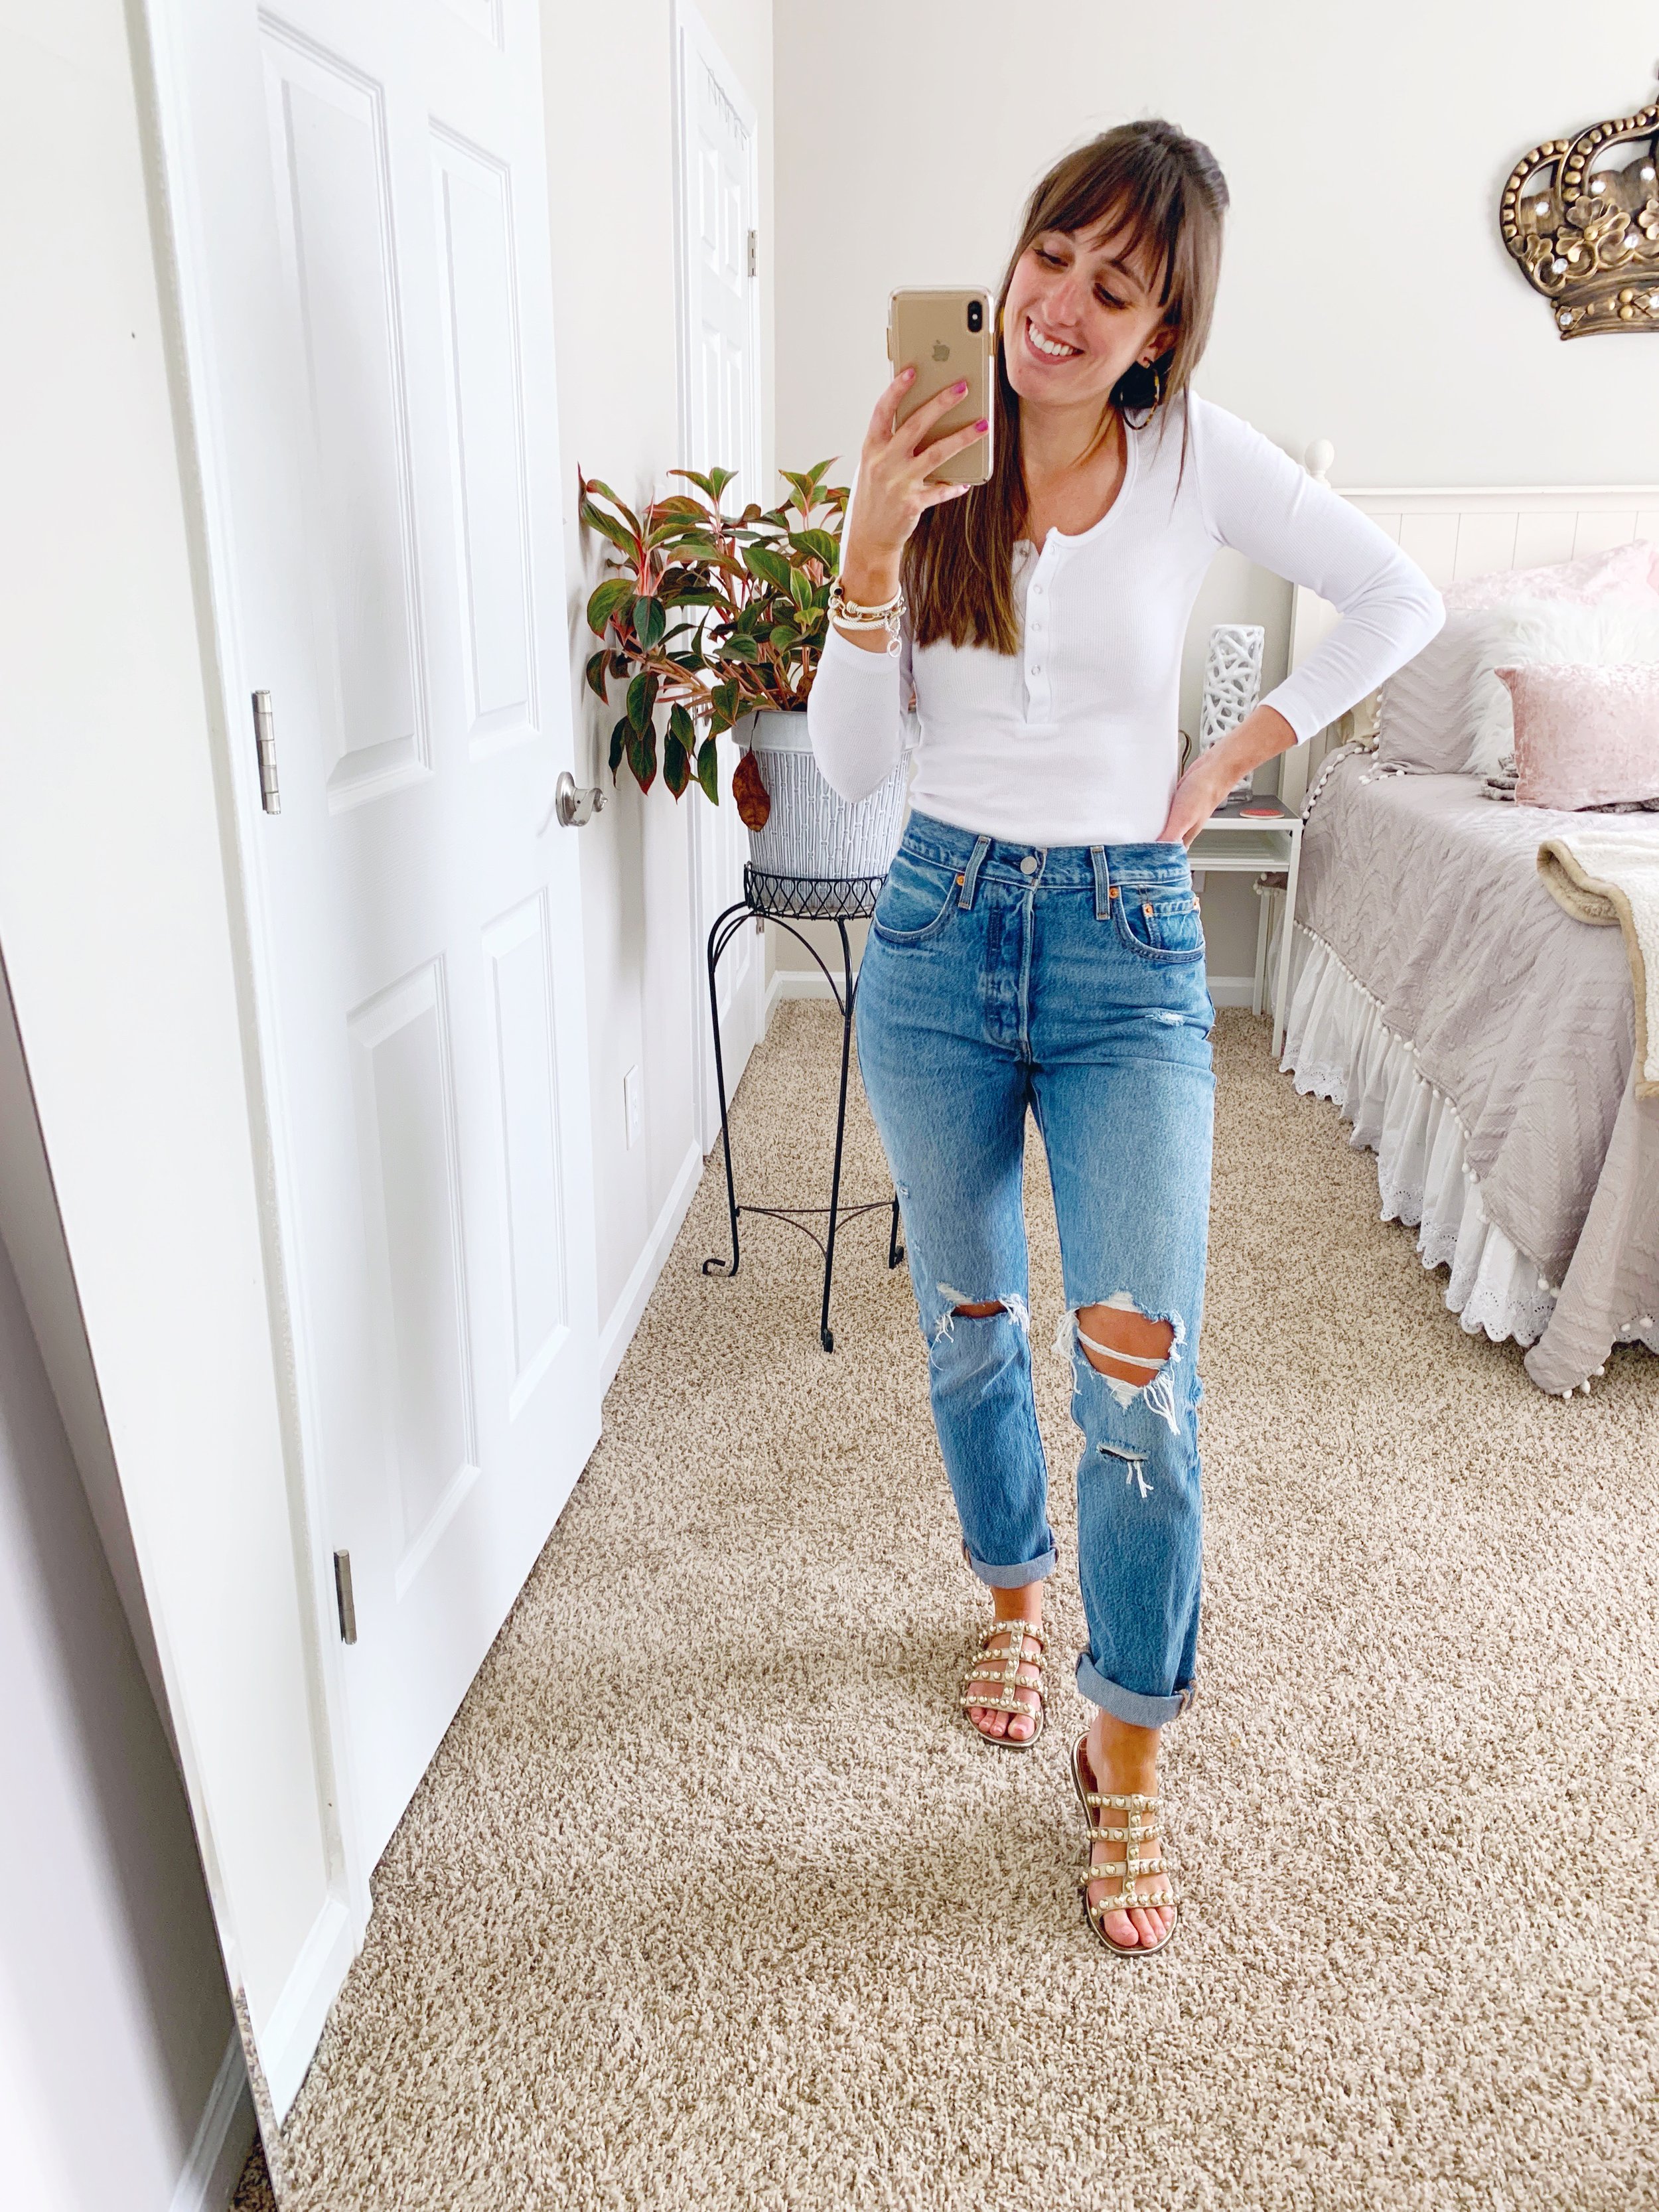 My Favorite Way to Style Mom Jeans